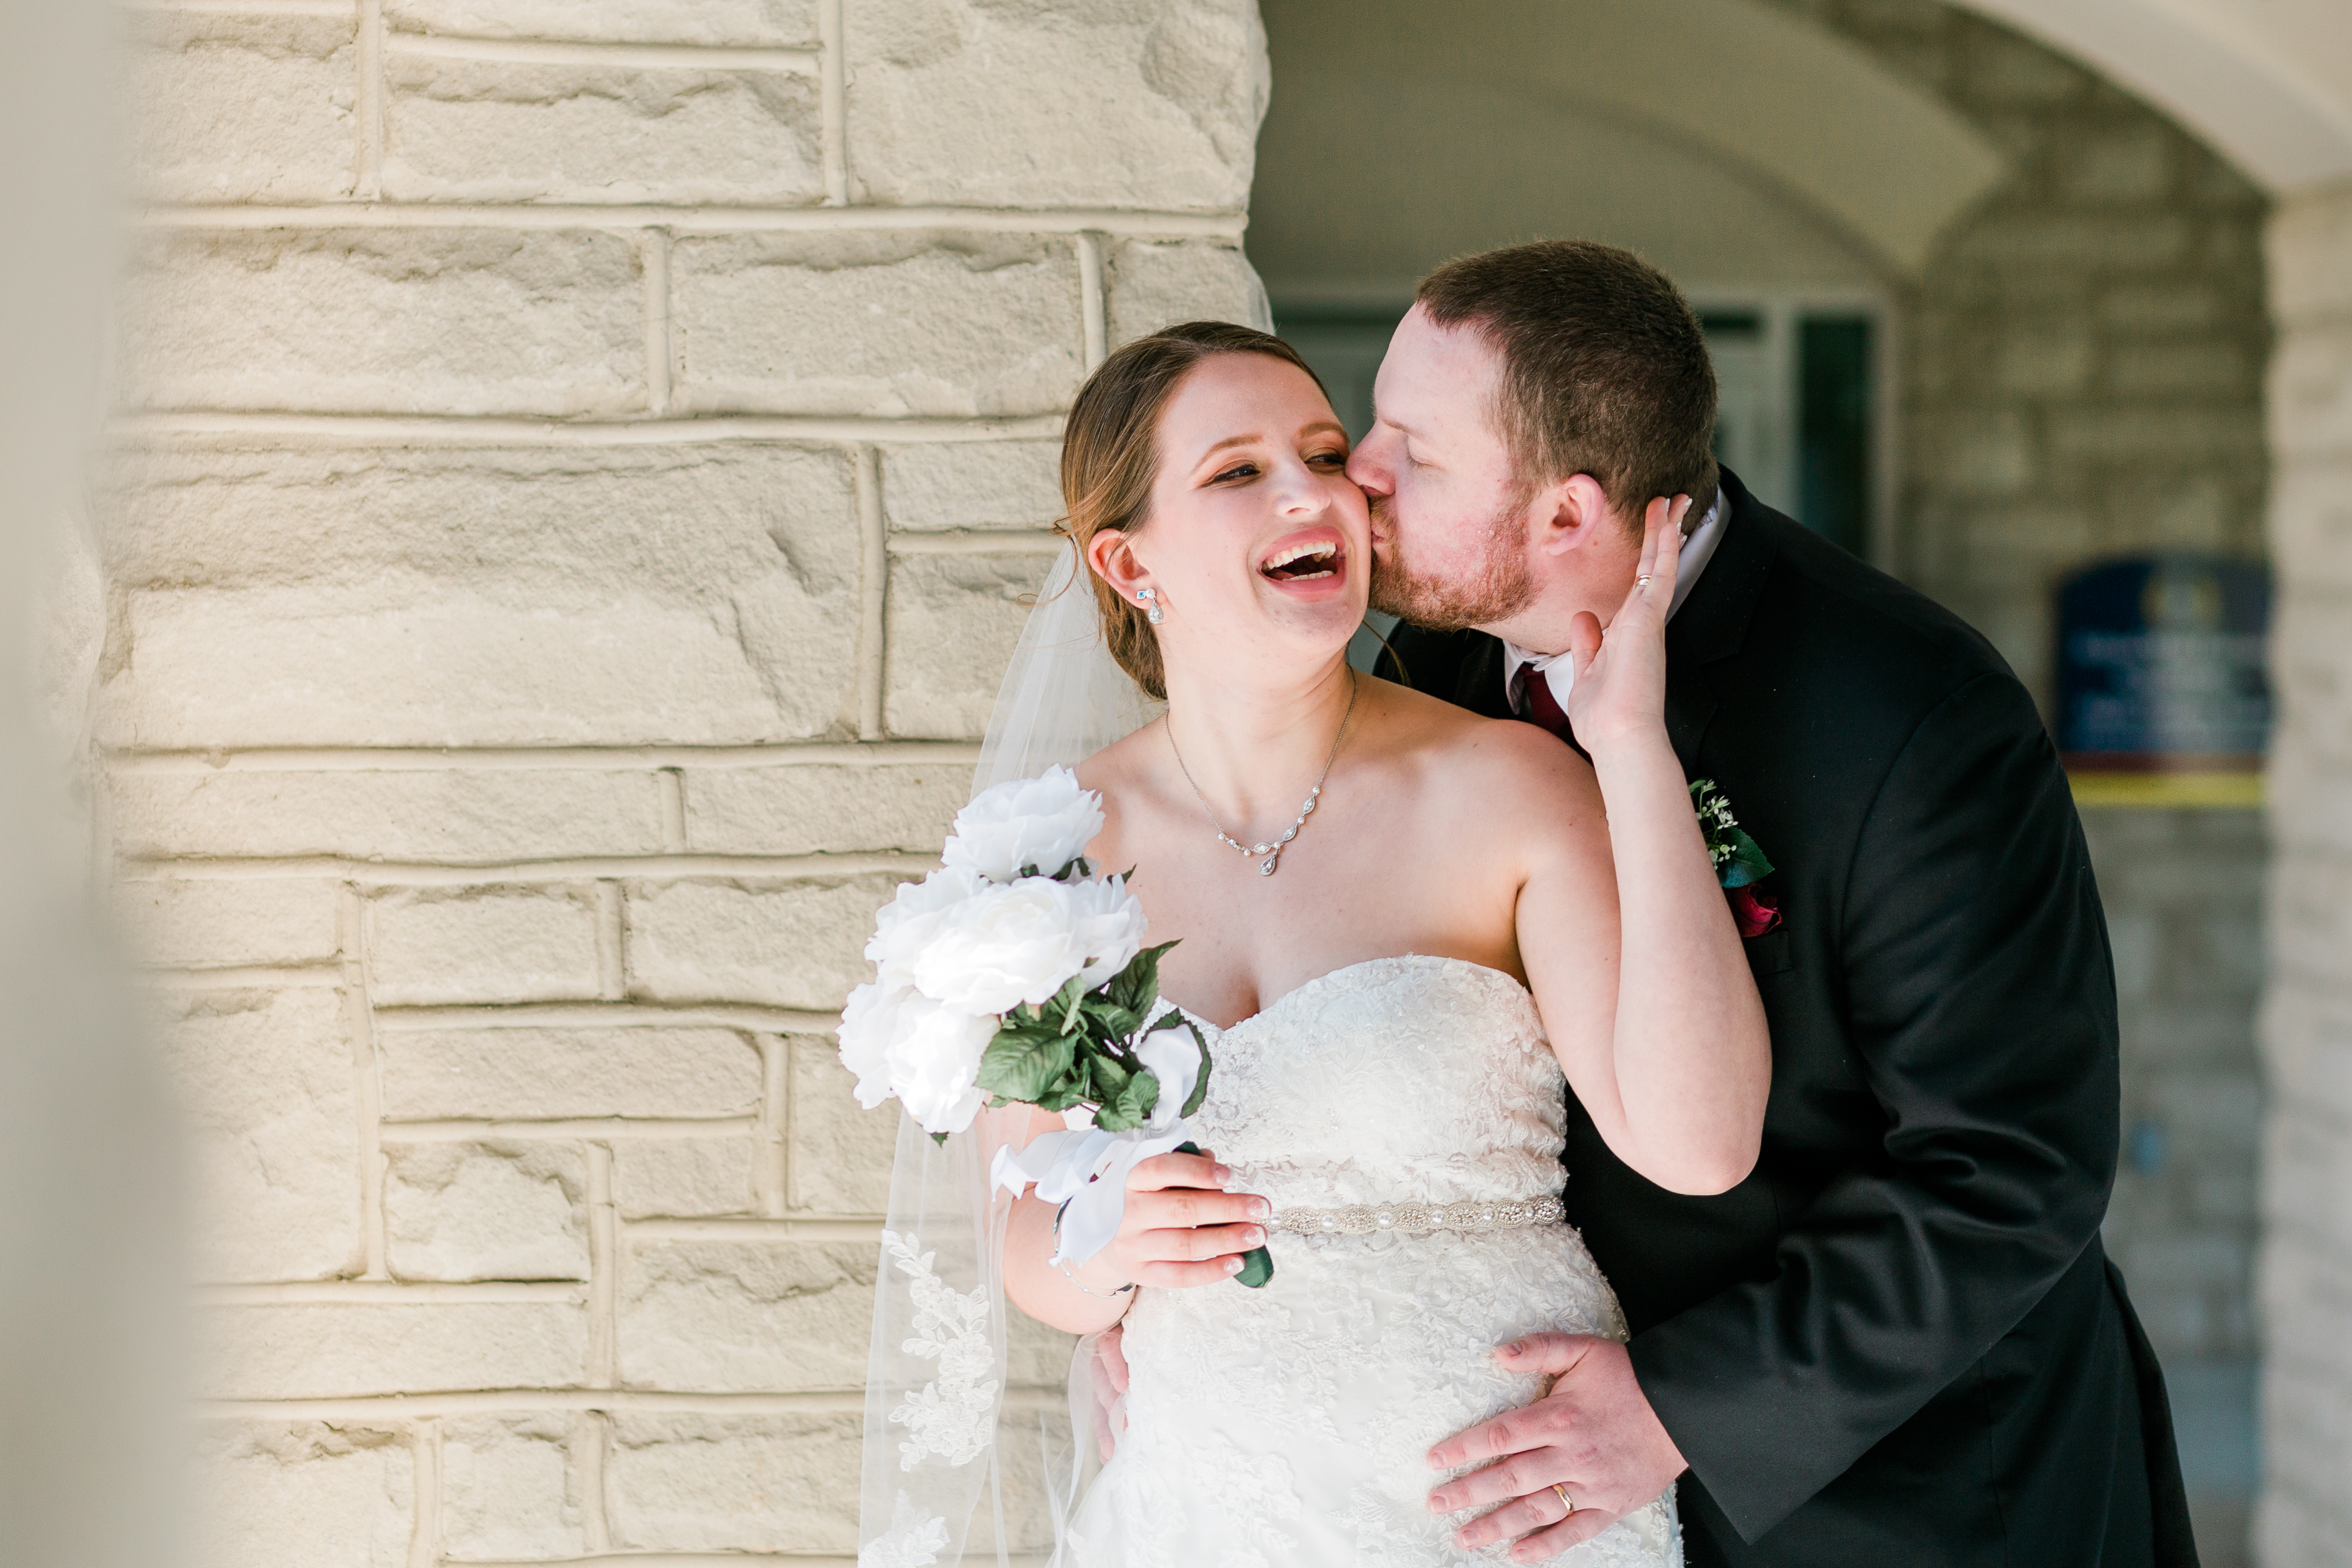 A bride laughs while her groom kisses her cheek